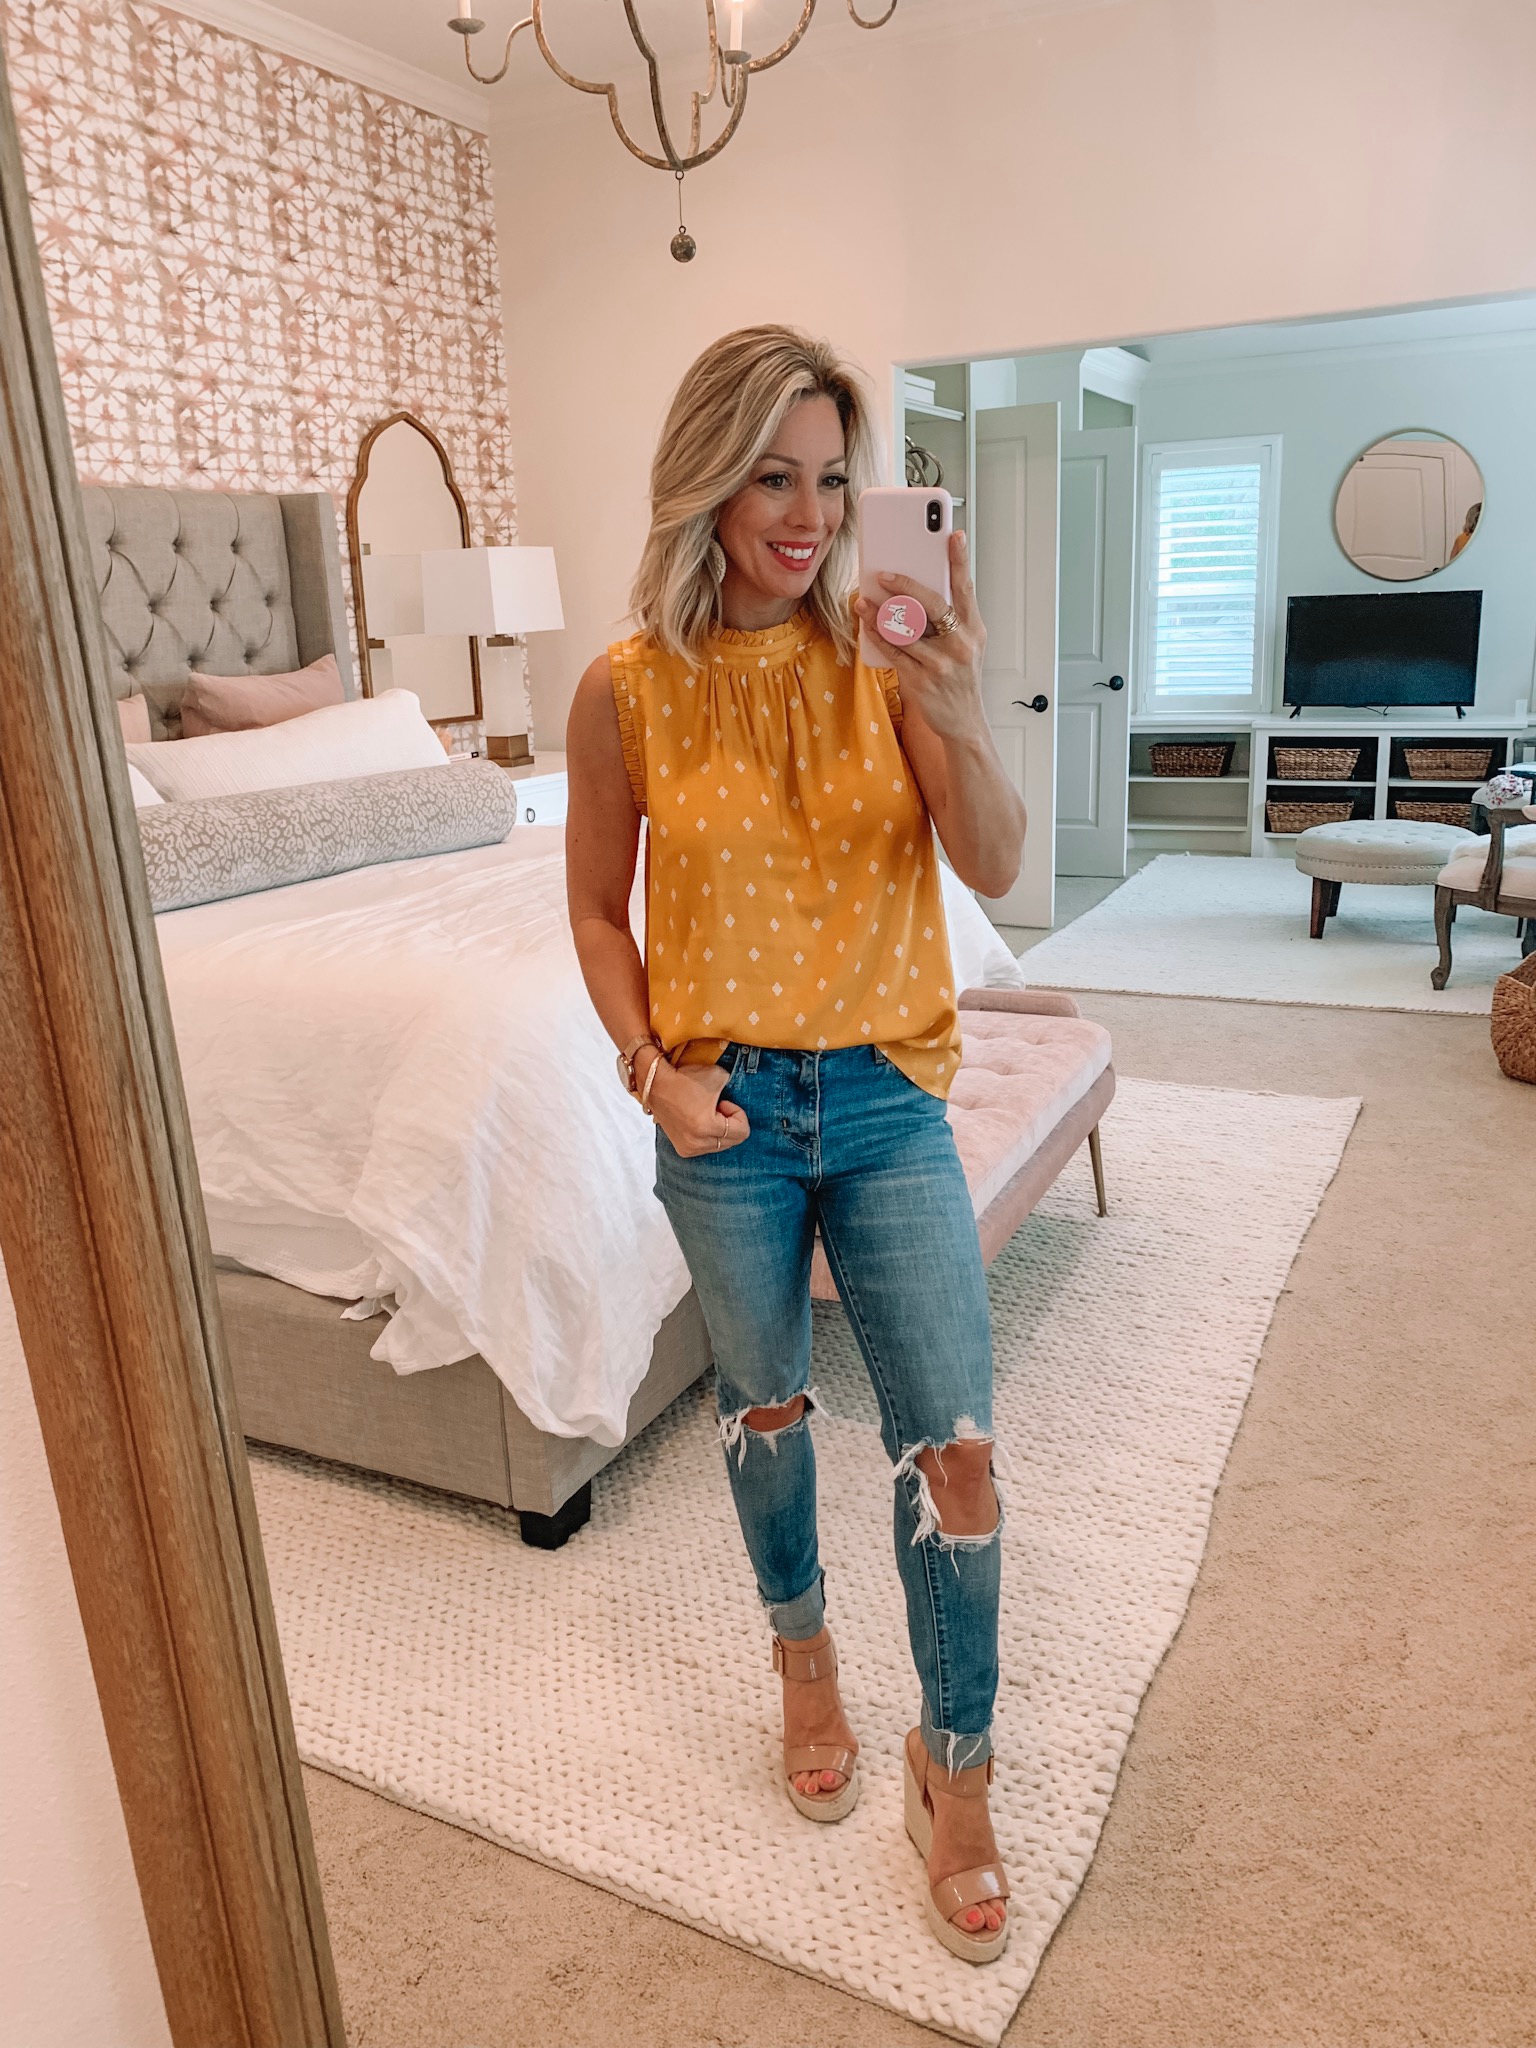 Marigold top and ripped jeans with wedges